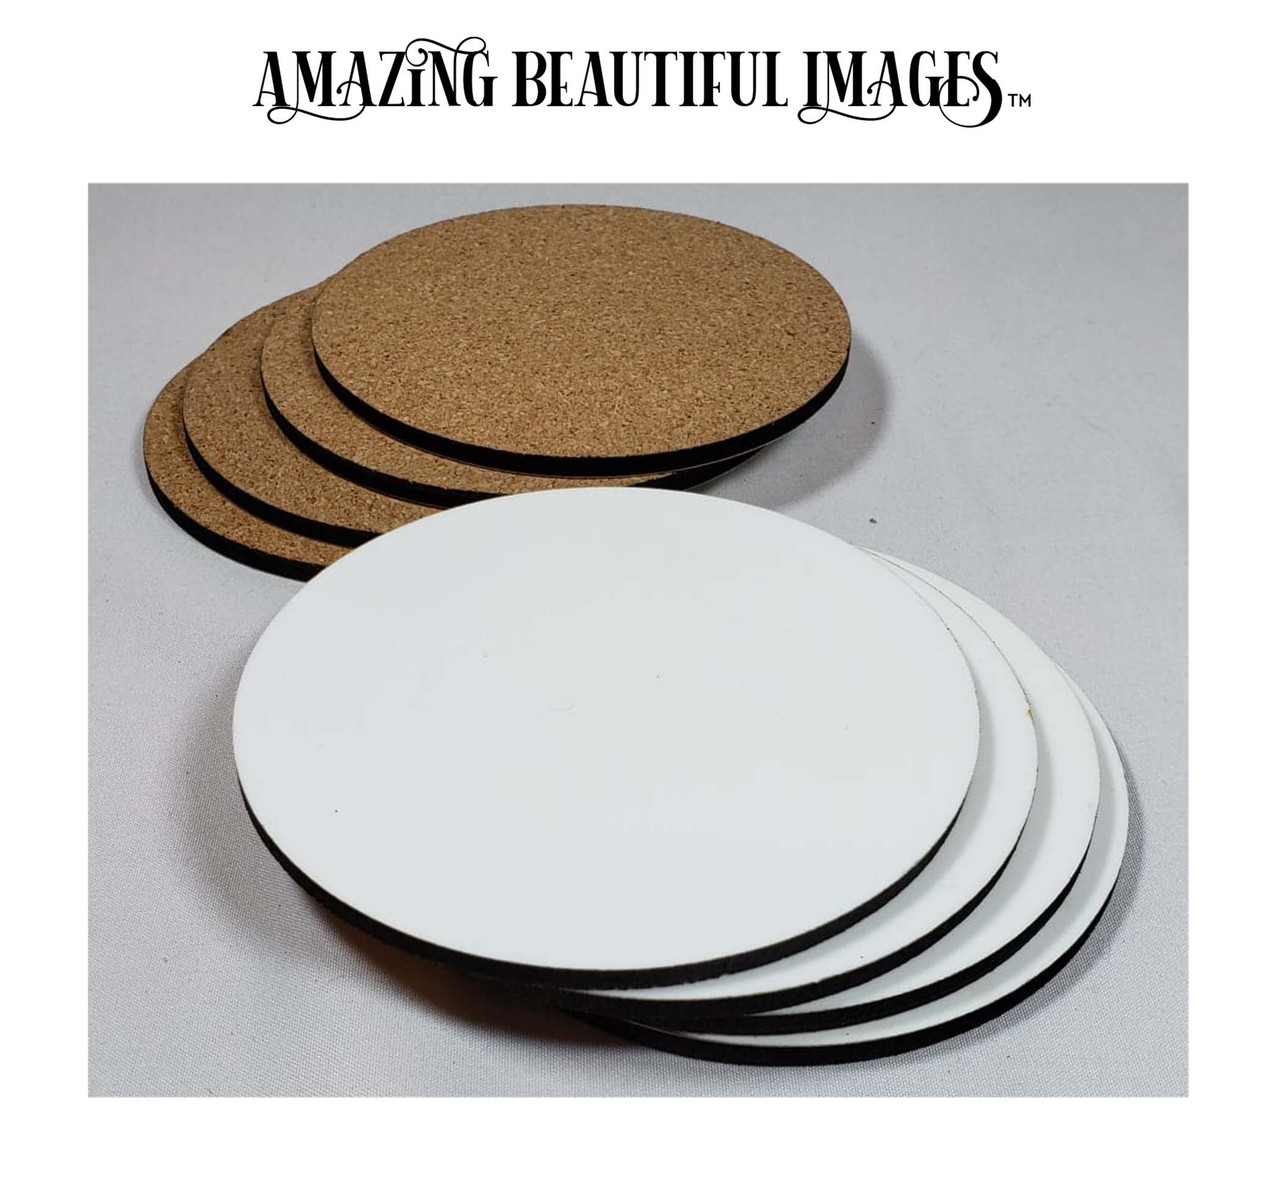 Sublimation Coaster Blanks - 3.75 Round with Cork Back. Pack of 10.